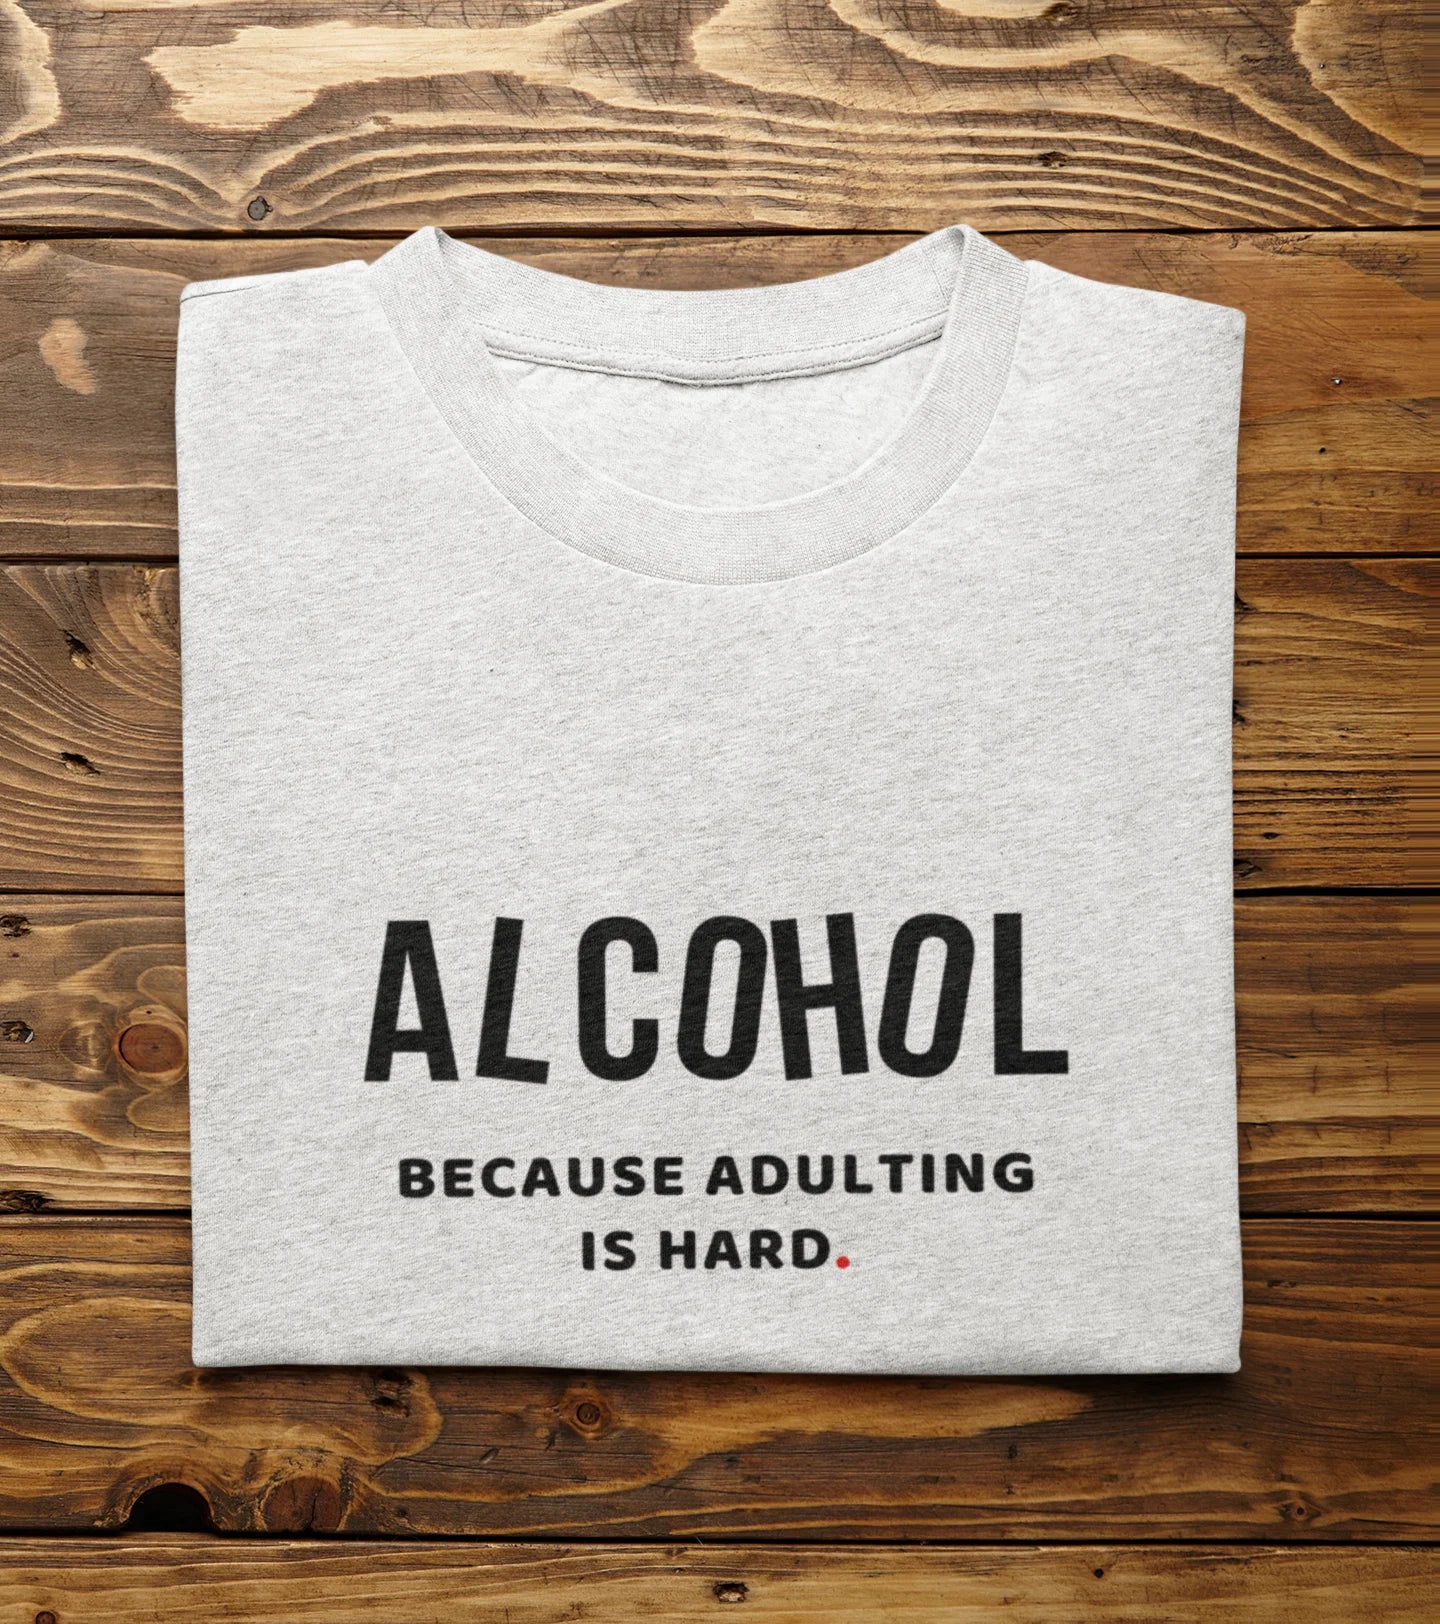 Alcohol, Because Adulting is Hard